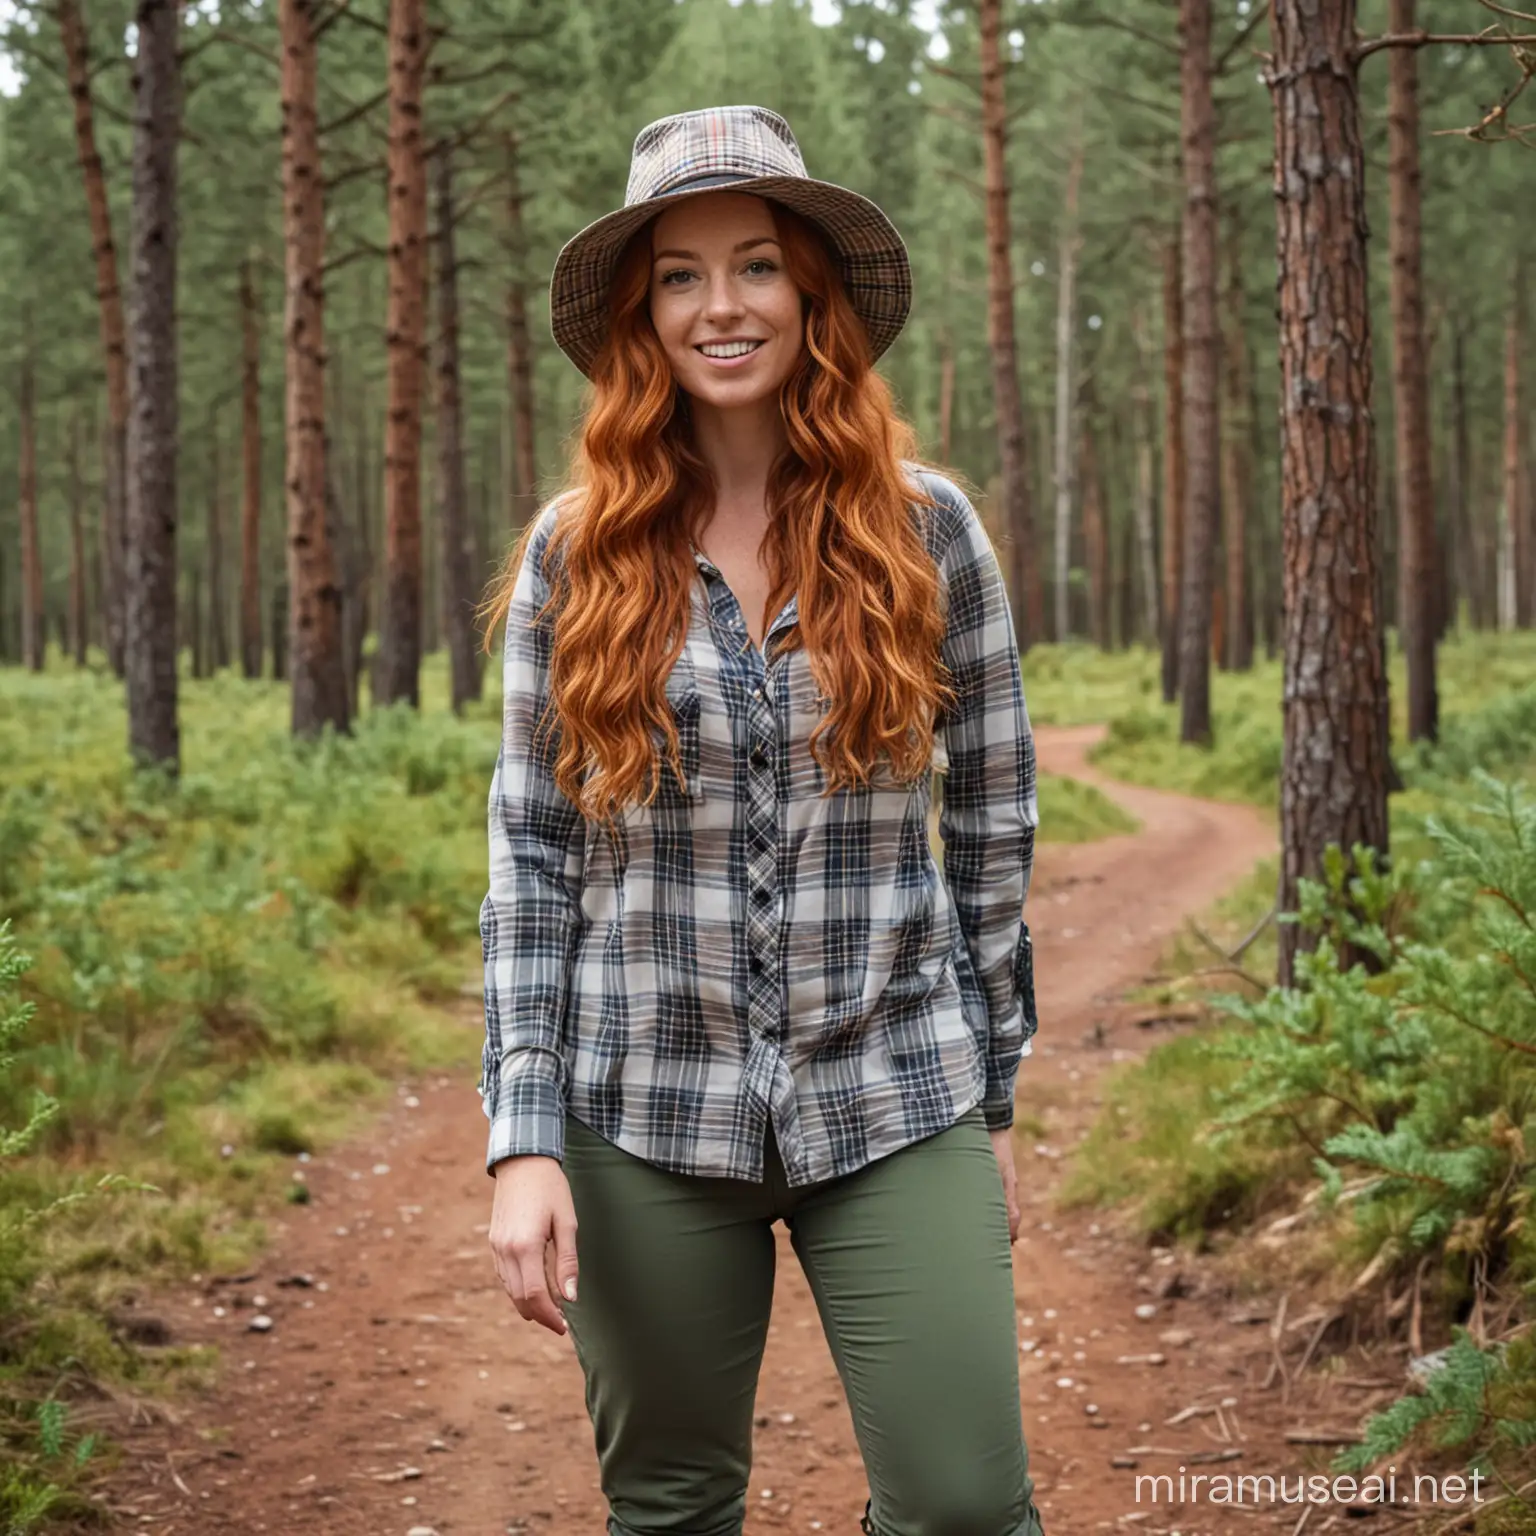 37 year old irish woman, fair skin, freckles, huge breasts, long red curly hair, hourglass figure, facing the viewer, hands on hips, smiling happily, visible from head to toe, dressed in hiking clothing, bucket hat, plaid buttoned shirt, lots of breast cleavage, western pine forest and trail in the background